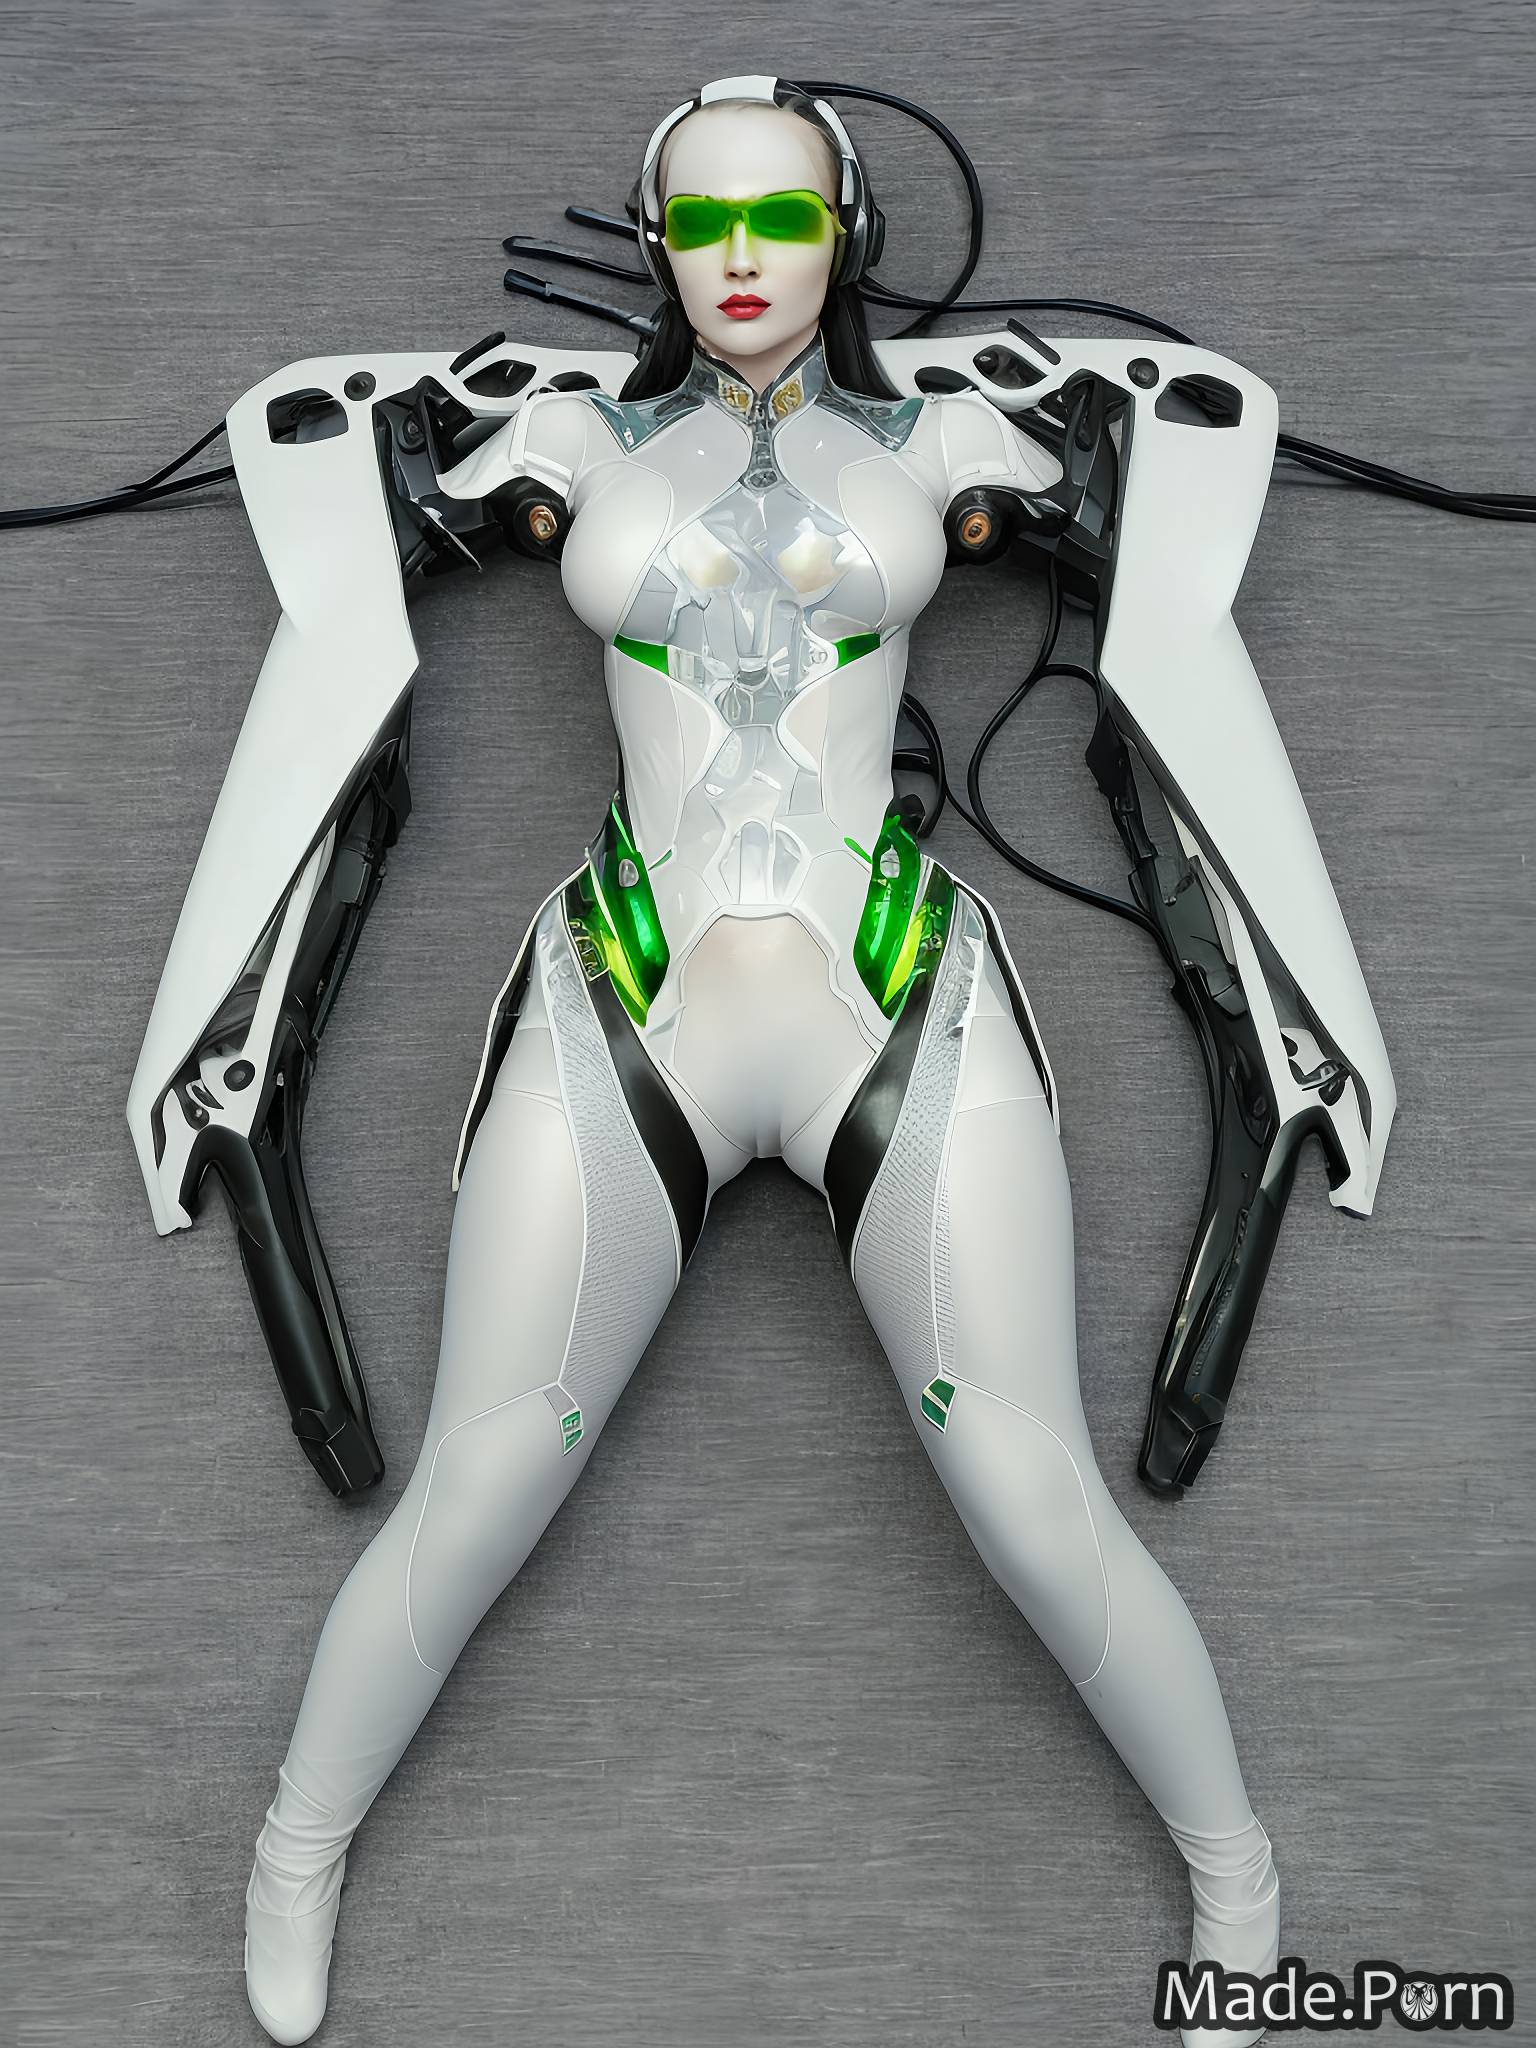 1536px x 2048px - Porn image of cosplay metal slutty ninja yellow damascus steel alien planet  created by AI